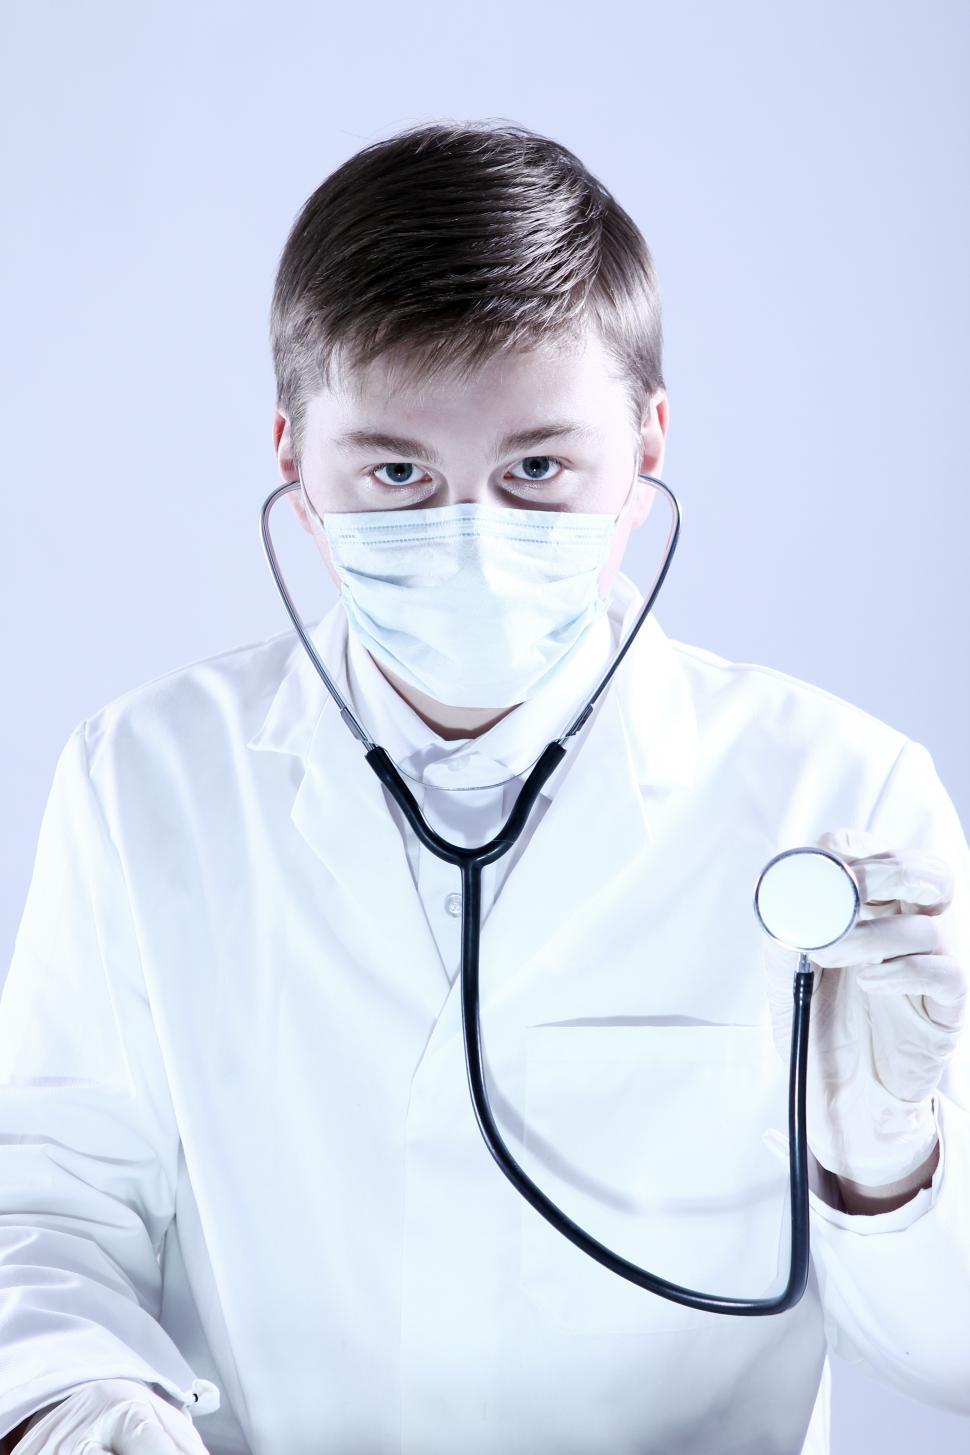 Free Image of Doctor with stethoscope and mask 